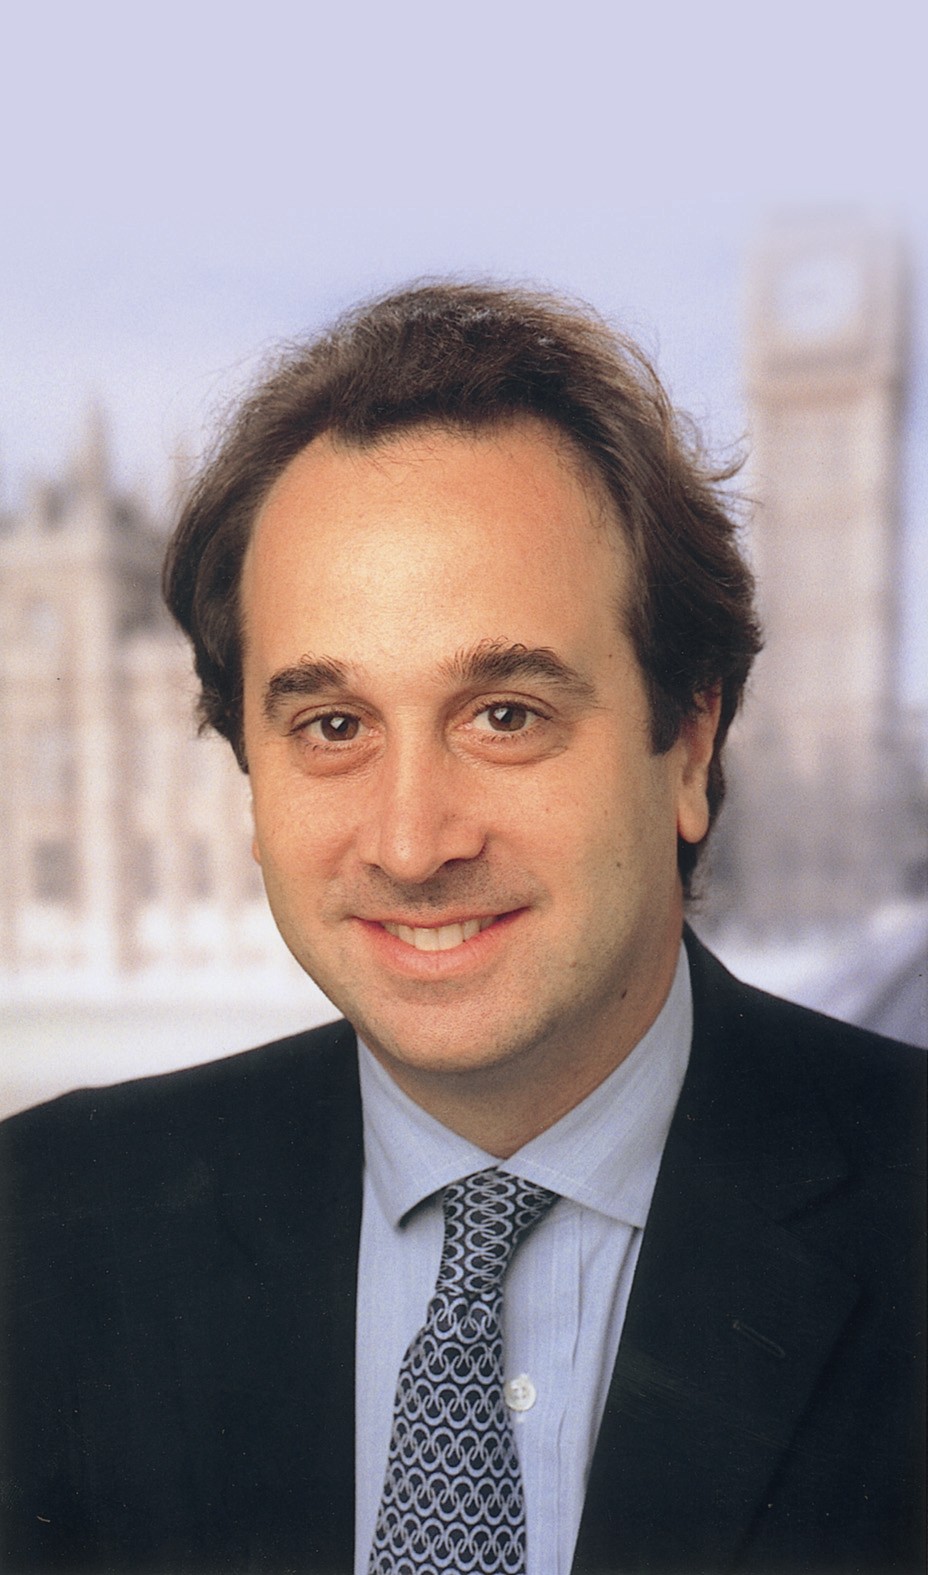 Brooks Newmark Resigns Amid Explicit Pictures Allegations Jewish News